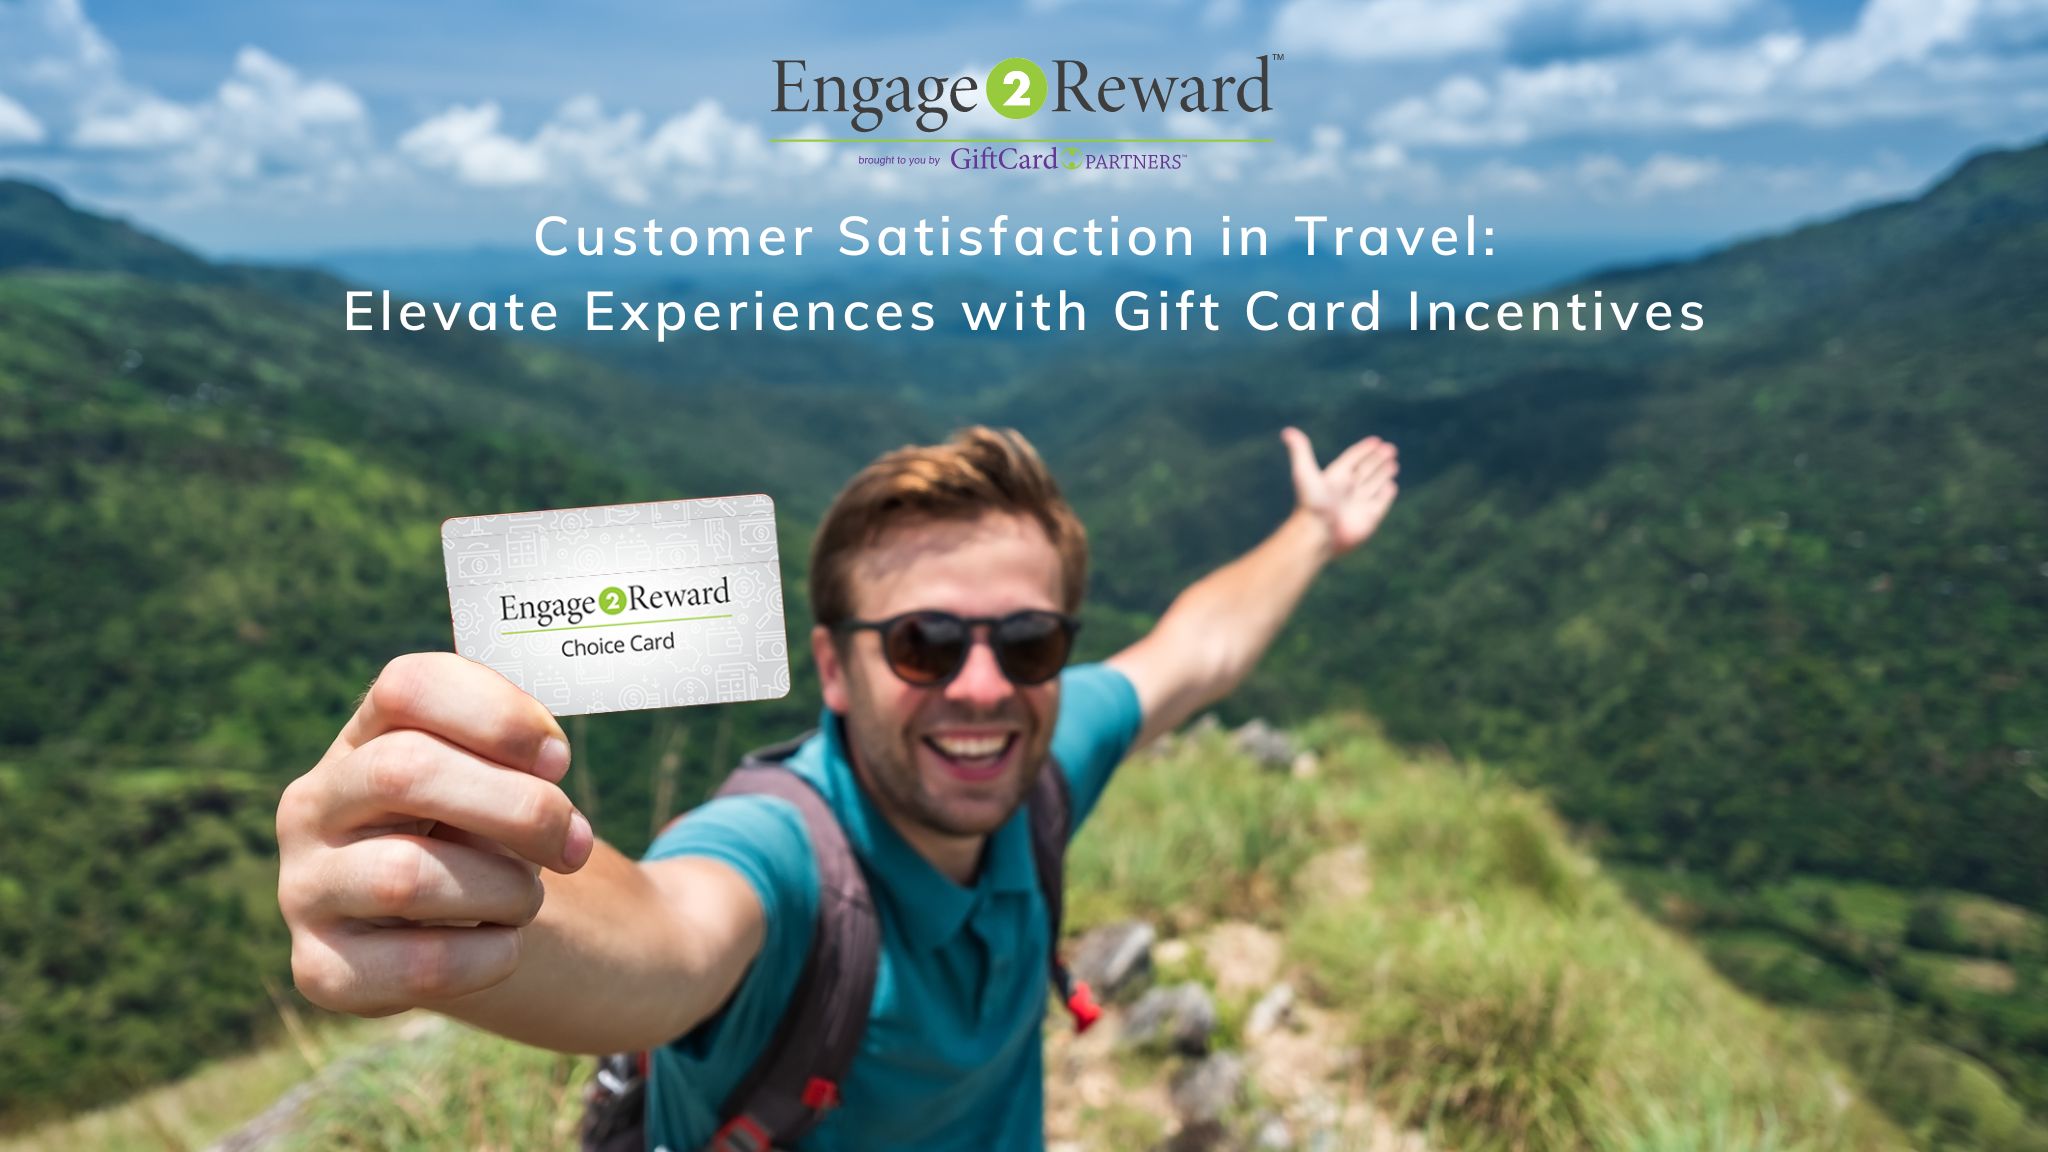 Customer Satisfaction in Travel: Elevate Experiences with Gift Card Incentives 